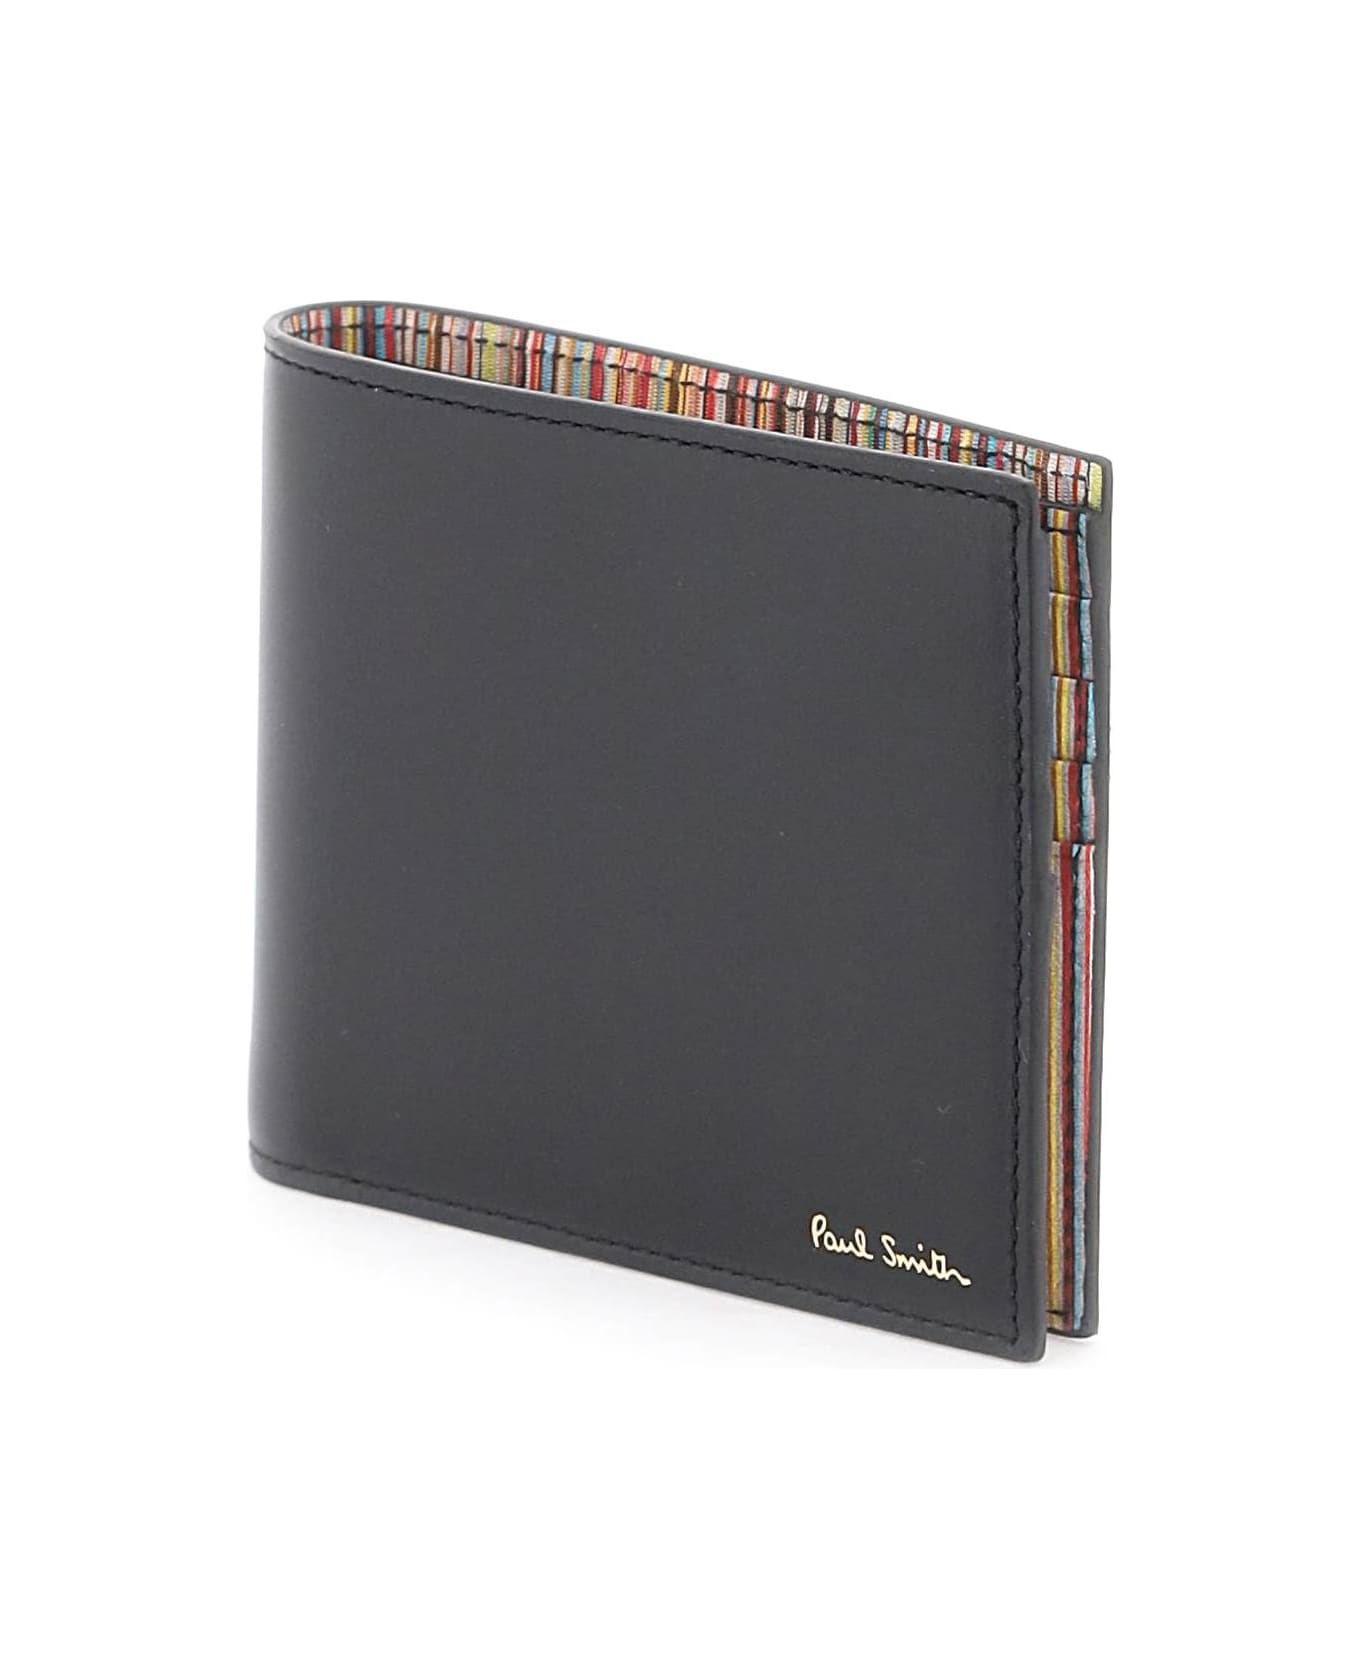 PS by Paul Smith 'signature Stripe' Wallet - Black